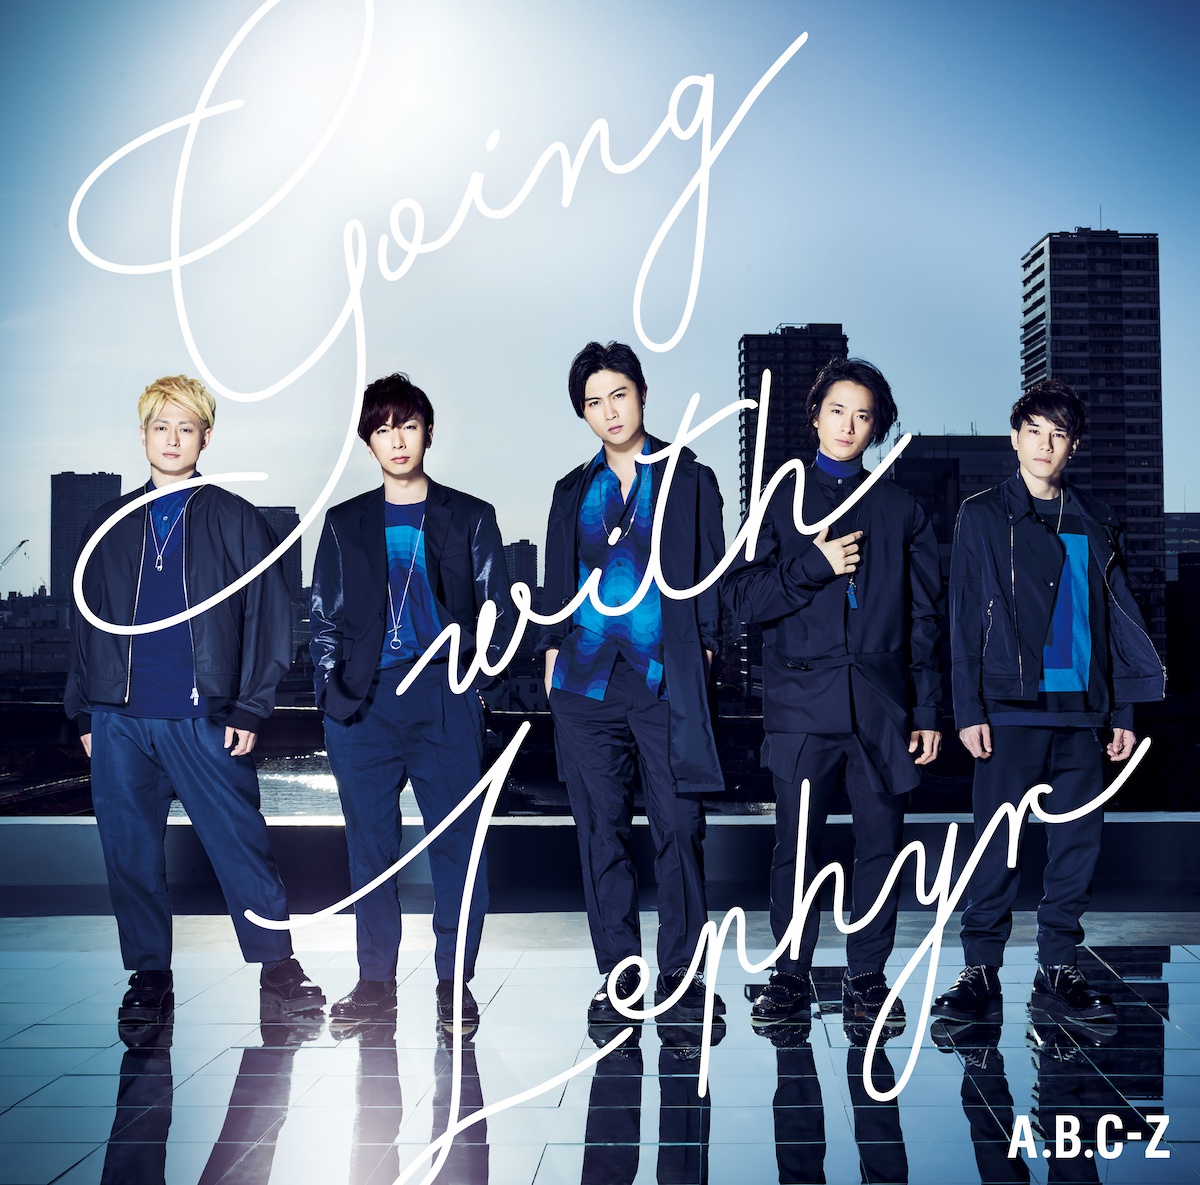 『A.B.C-Z - Saw me tight』収録の『Going with Zephyr』ジャケット